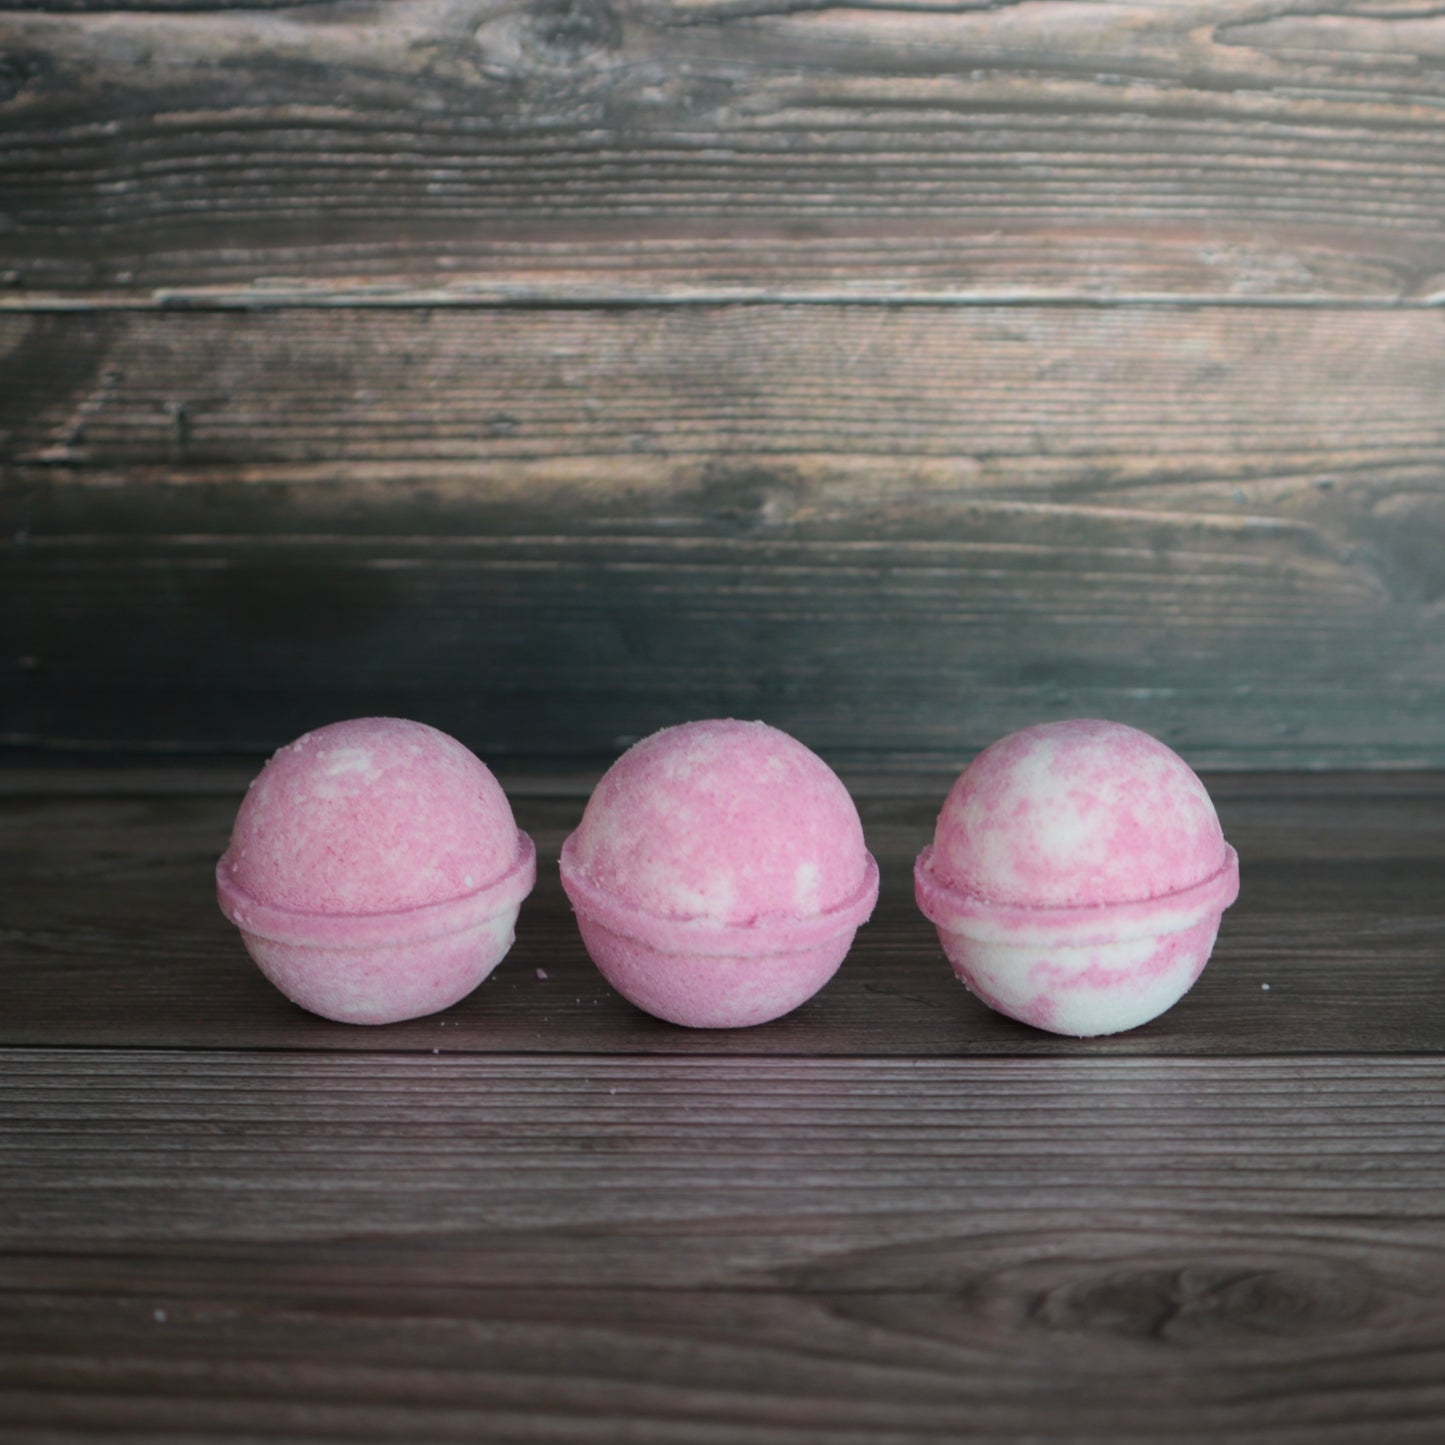 3 round pink and white marbled bath bombs, lined up.